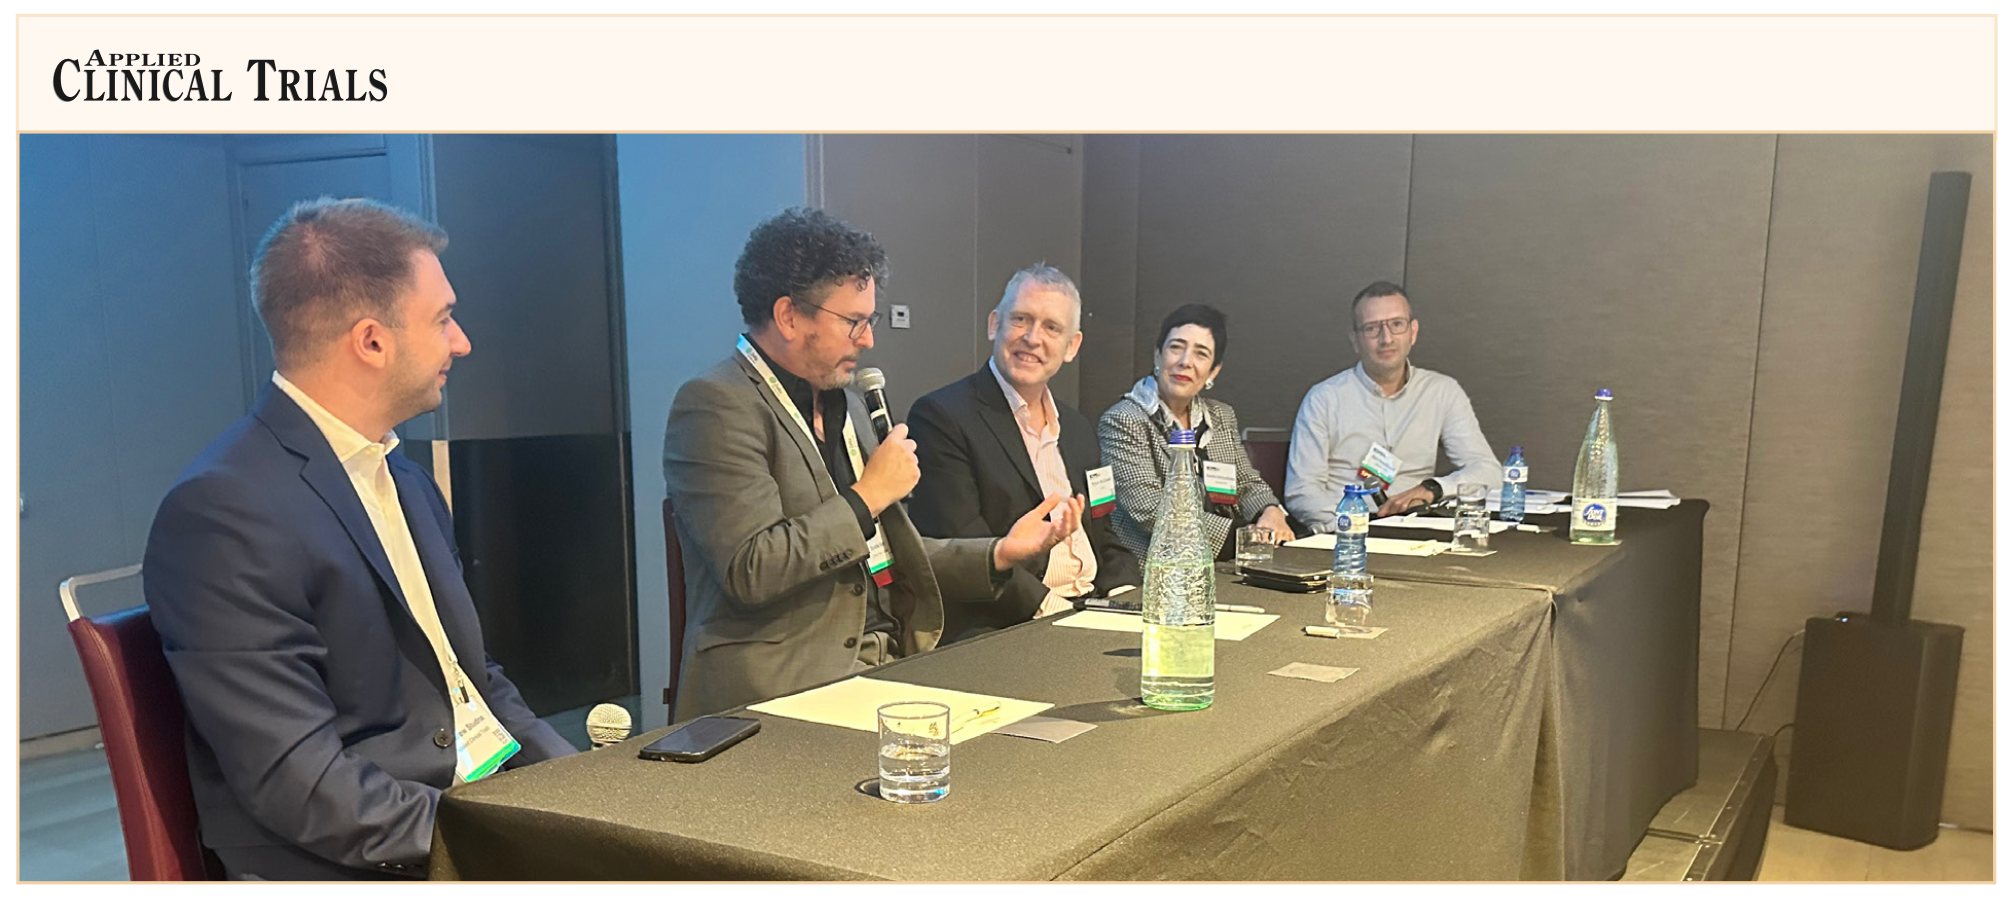 Panelists discuss alignment on terminology in the space of eCOAs, ePROs, and DHTs at SCOPE Europe 2023 in Barcelona, Spain. From left to right: Andy Studna, MJH Life Sciences; Scottie Kern, eCOA Consortium, Critical Path Institute; Brian McDowell, Clario; Estrella Garcia Alvarez, PhD, Almirall SA; and Bart Roofthooft, Janssen R&D.